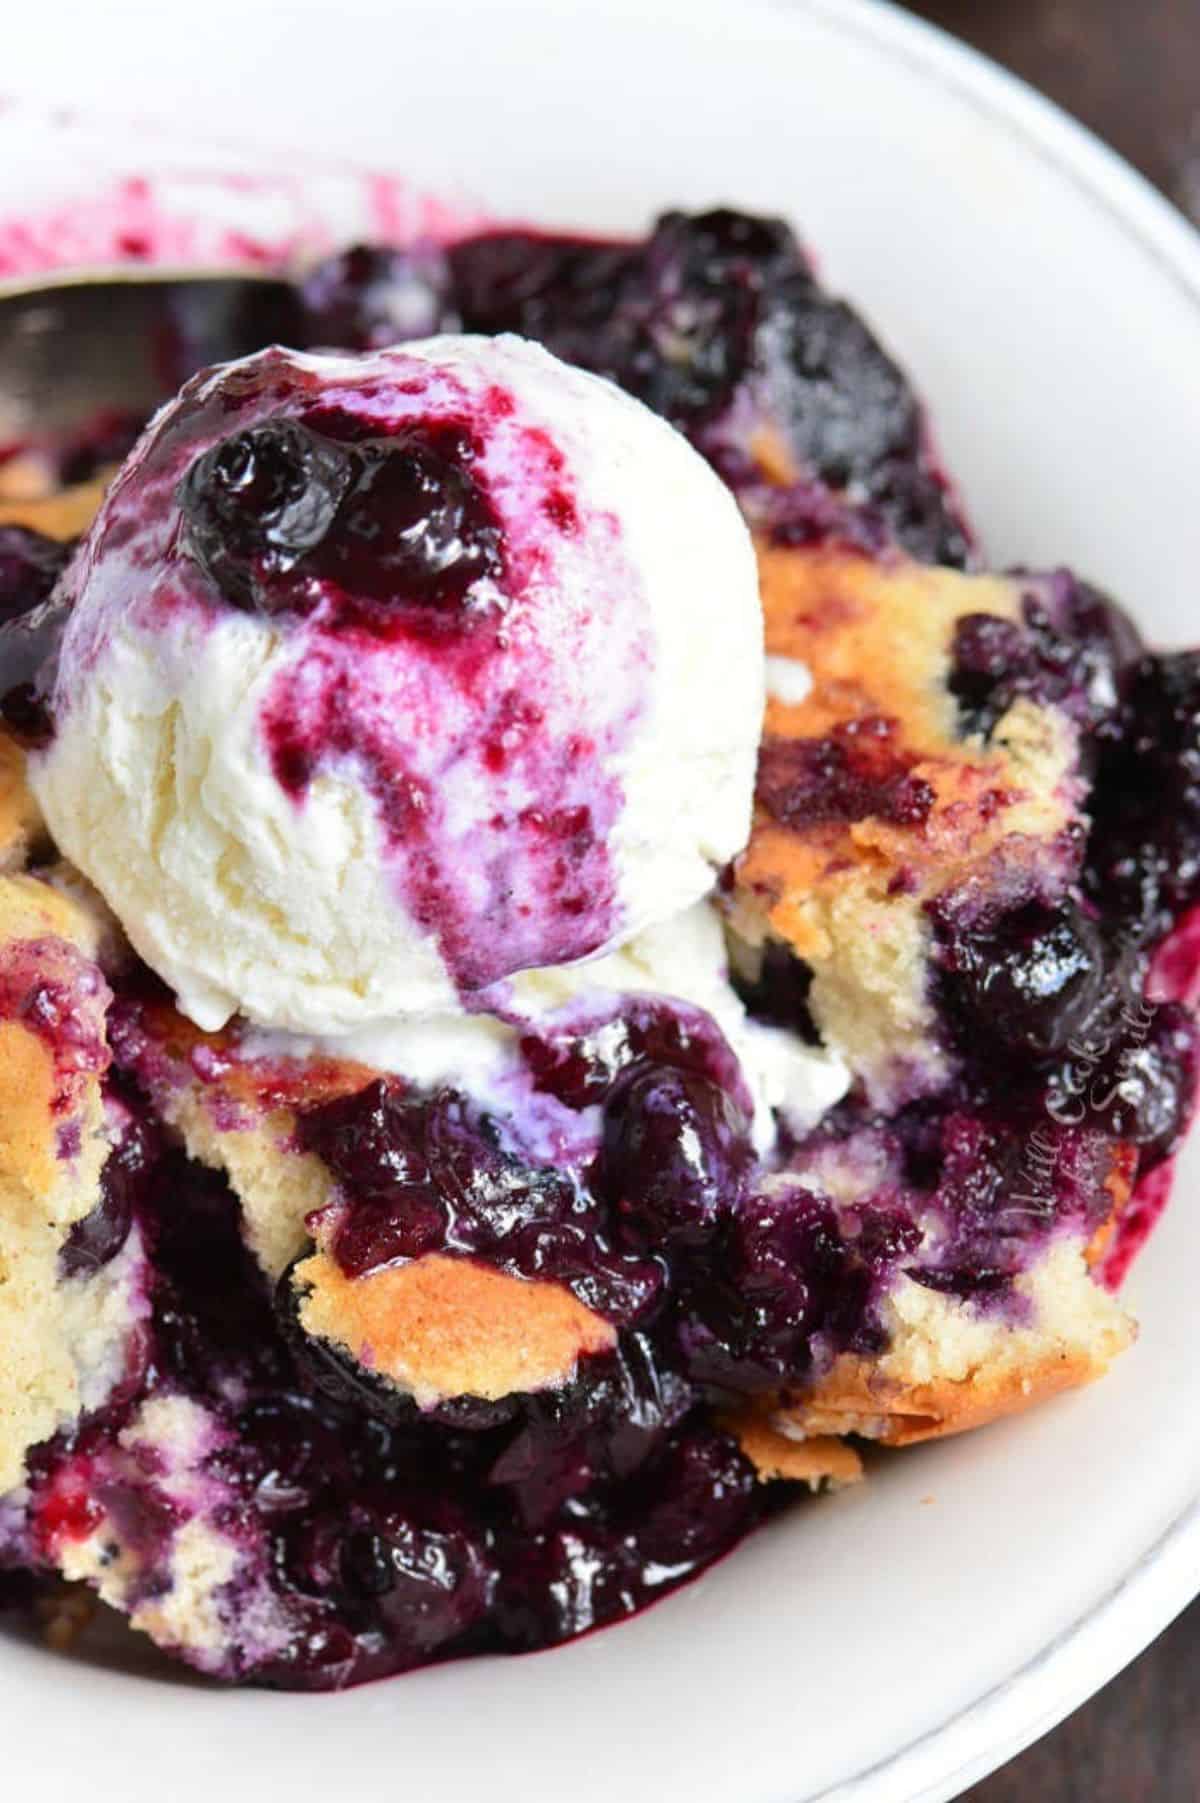 blueberry cobbler topped with ice cream in a white plate.